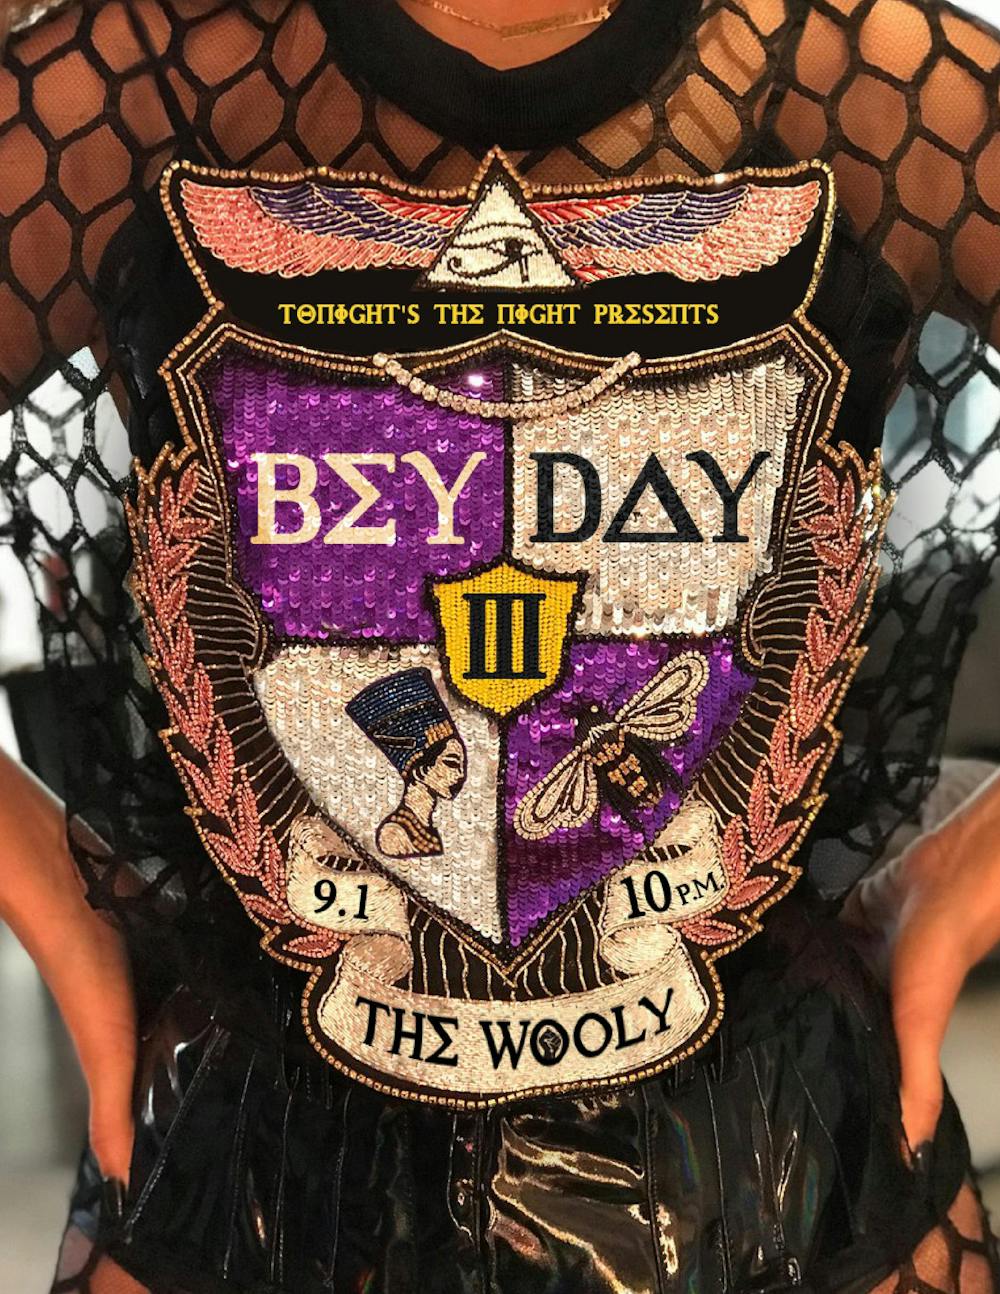 bey day 2018